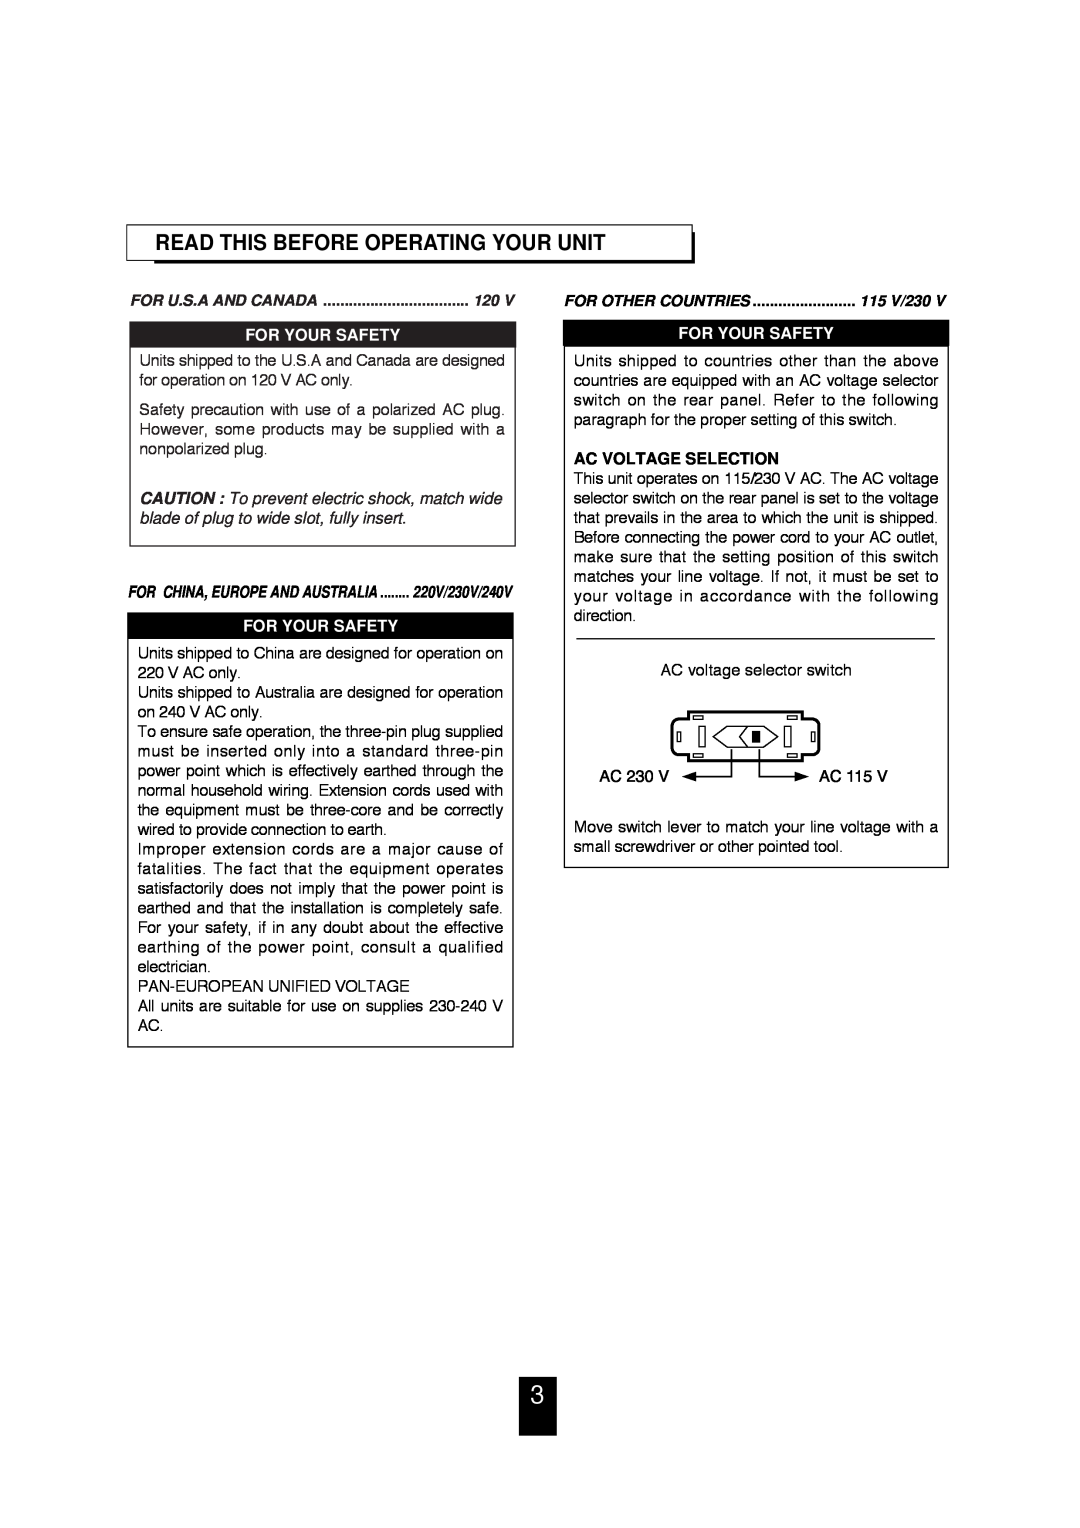 Sherwood RX-4105 manual Read This Before Operating Your Unit, For Your Safety, Ac Voltage Selection 